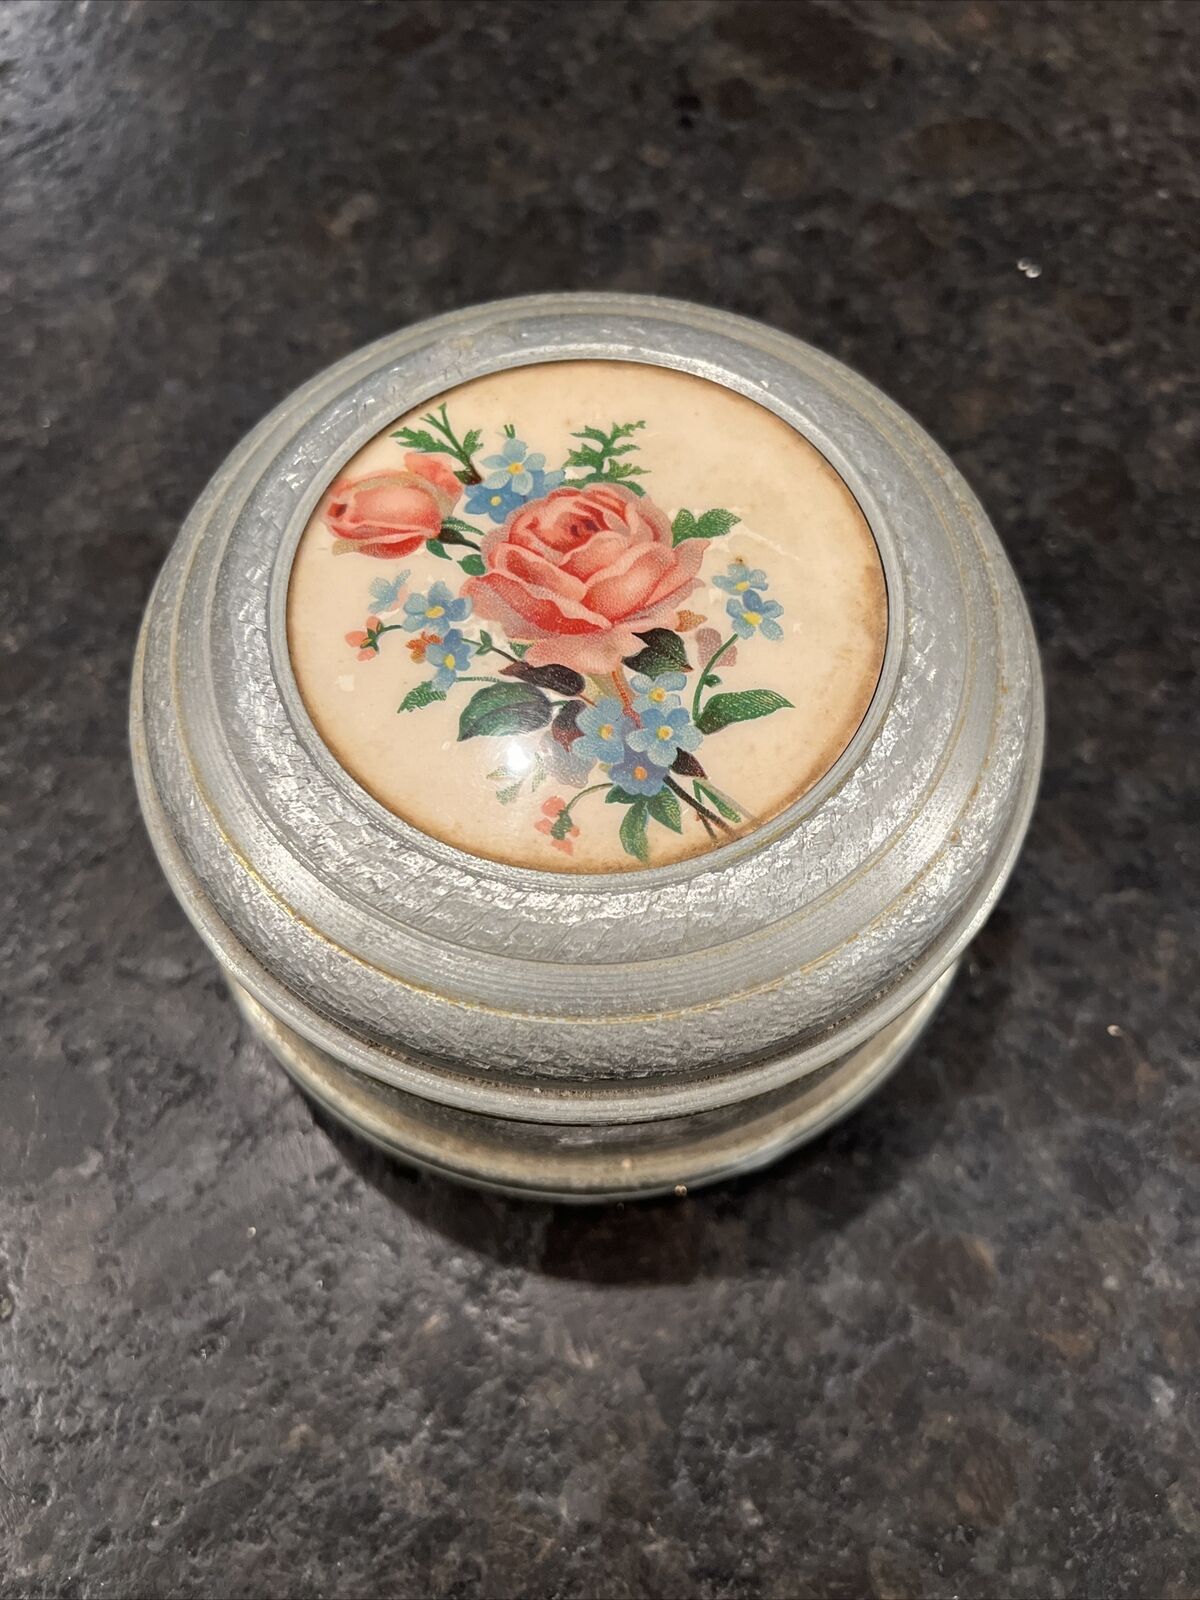 Vintage Metal Powder Puff/Music Box/Lid with Rose Bouquet. works